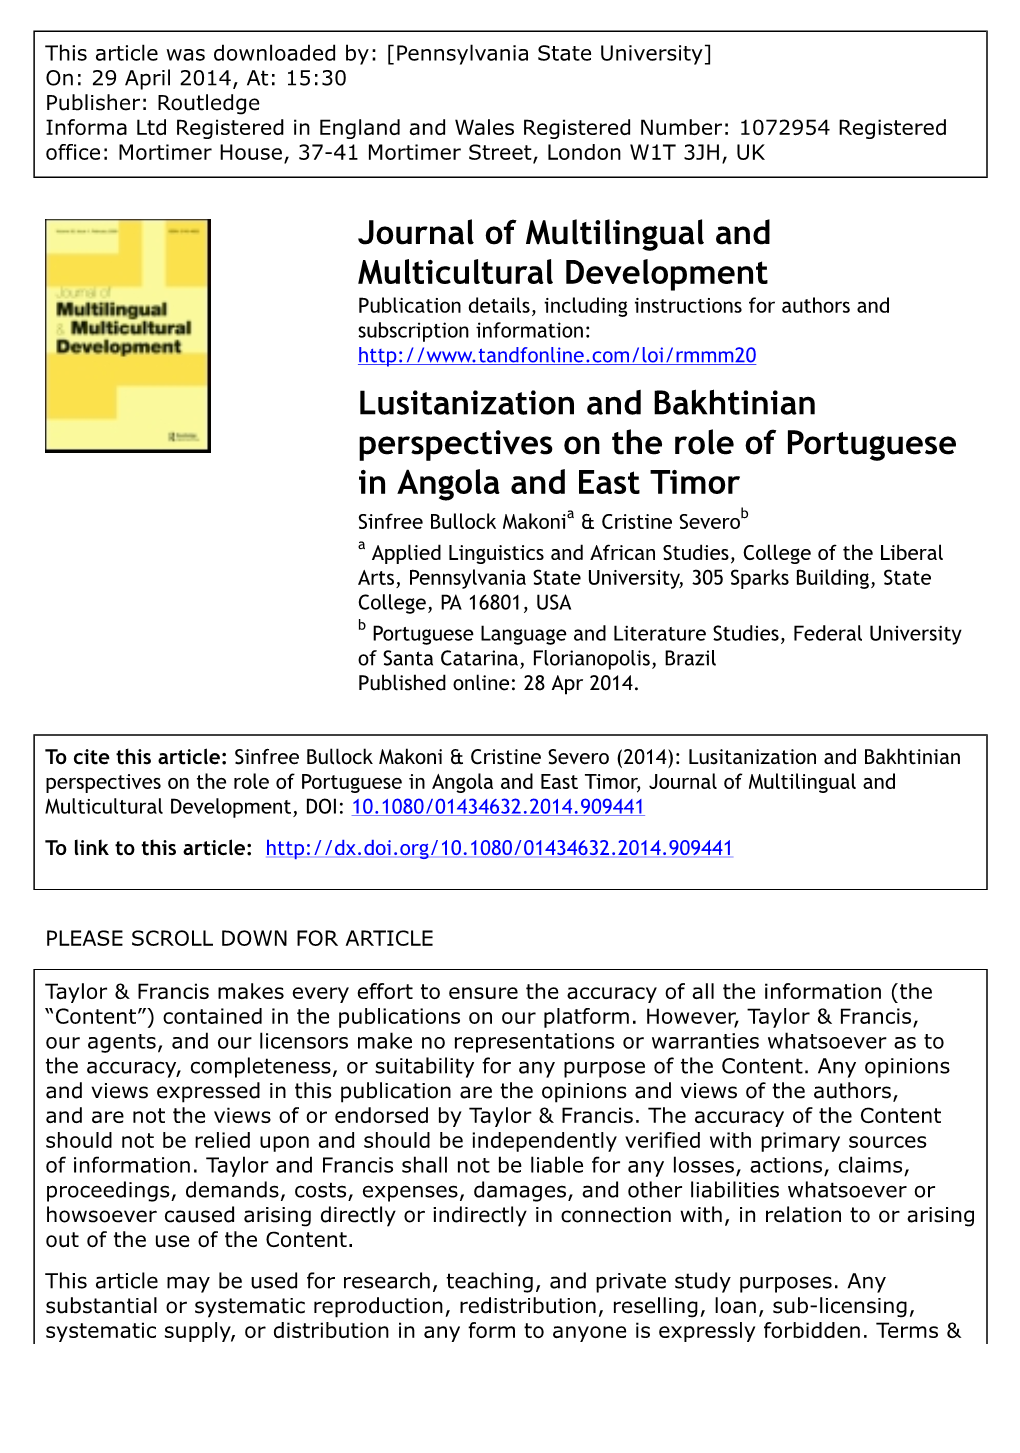 Lusitanization and Bakhtinian Perspectives on the Role Of